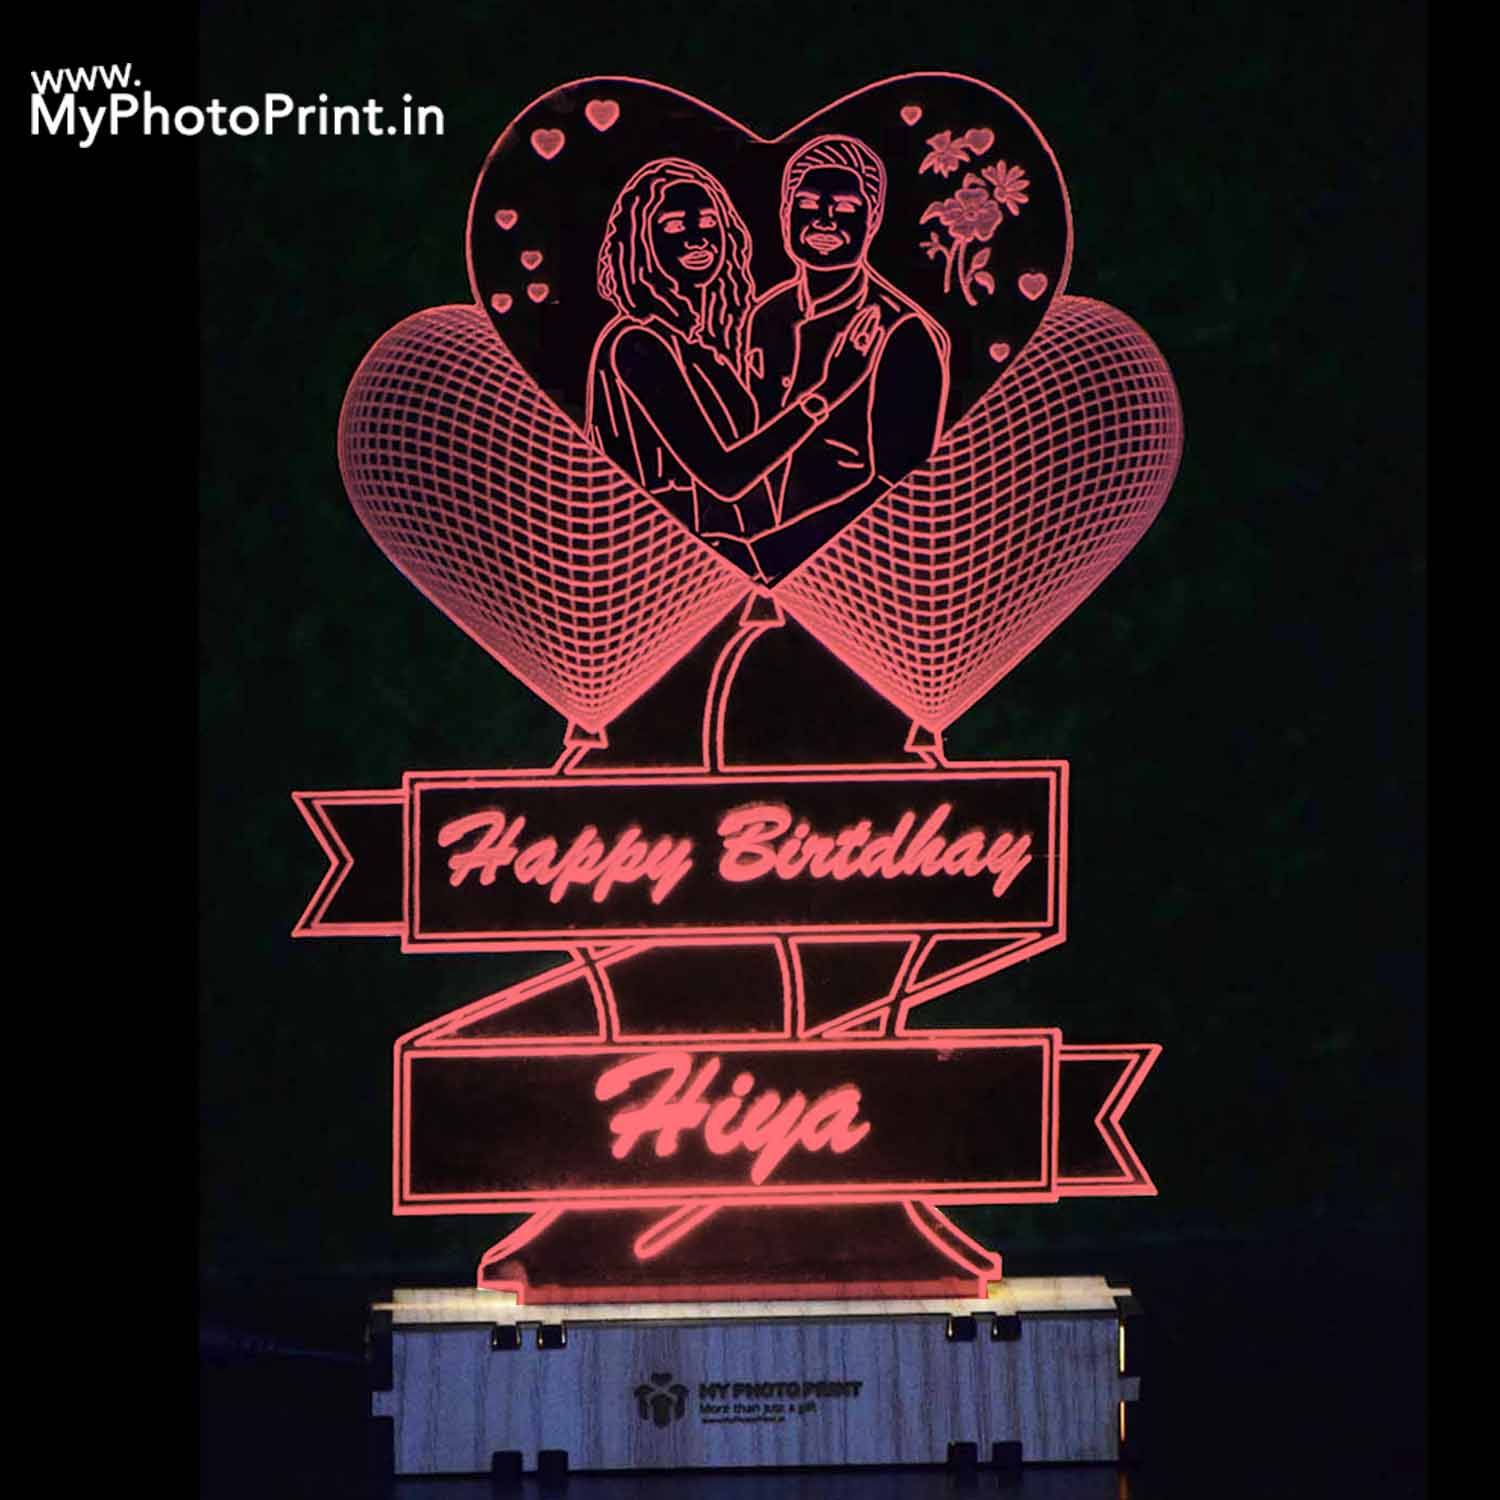 Personalized Unique 3 Heart Acrylic Photo 3D illusion LED Lamp with Color Changing Led and Remote#2055